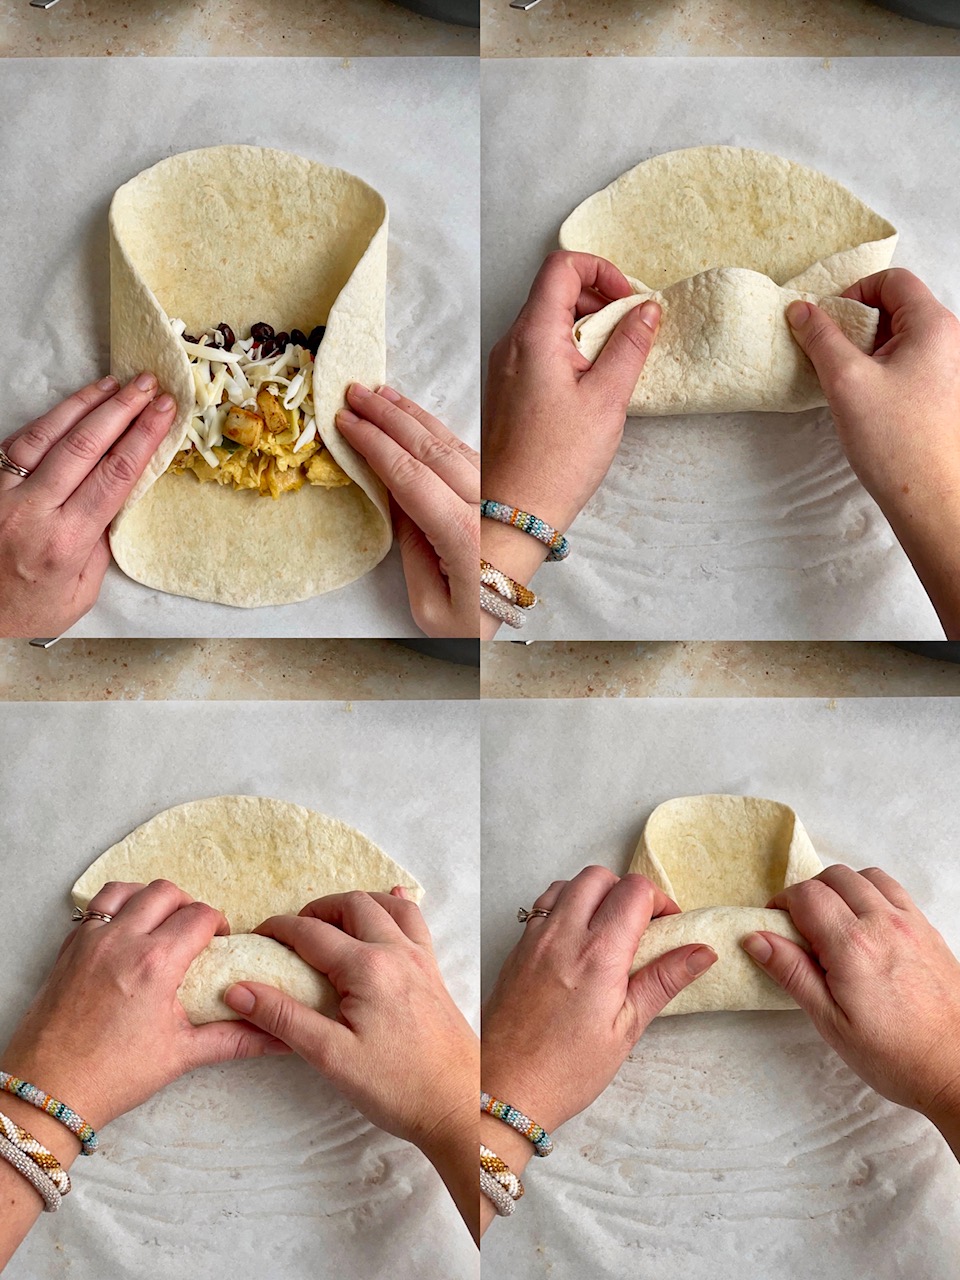 Four photos showing the process of rolling up a breakfast burrito.